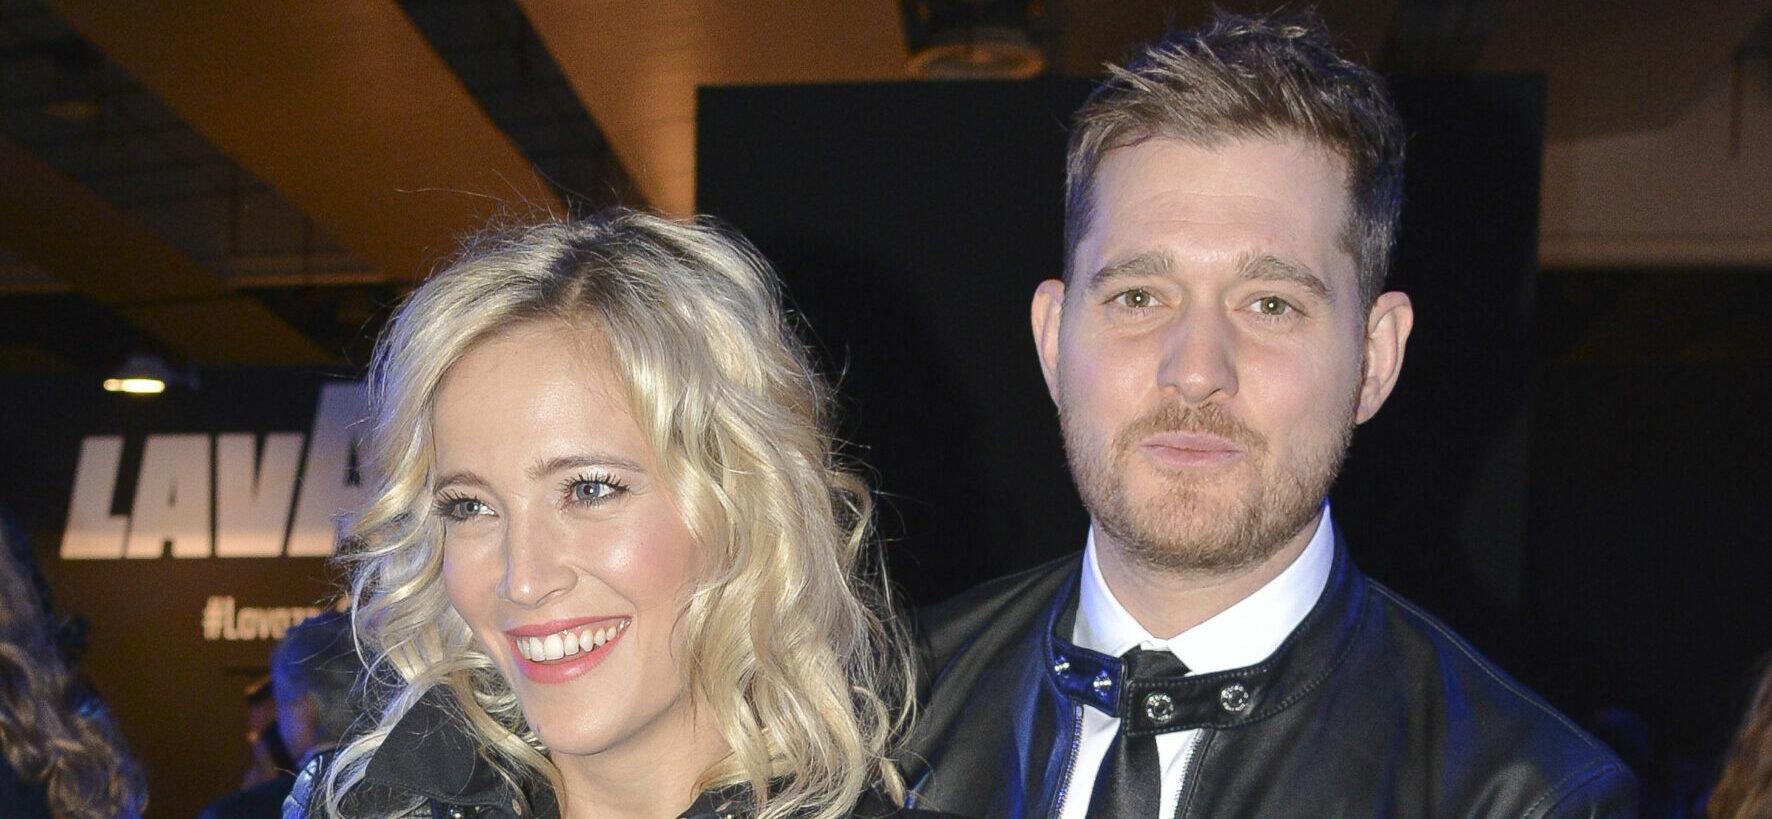 Michael Buble's wife Luisana Lopilato gave birth to the couple's second child on Friday